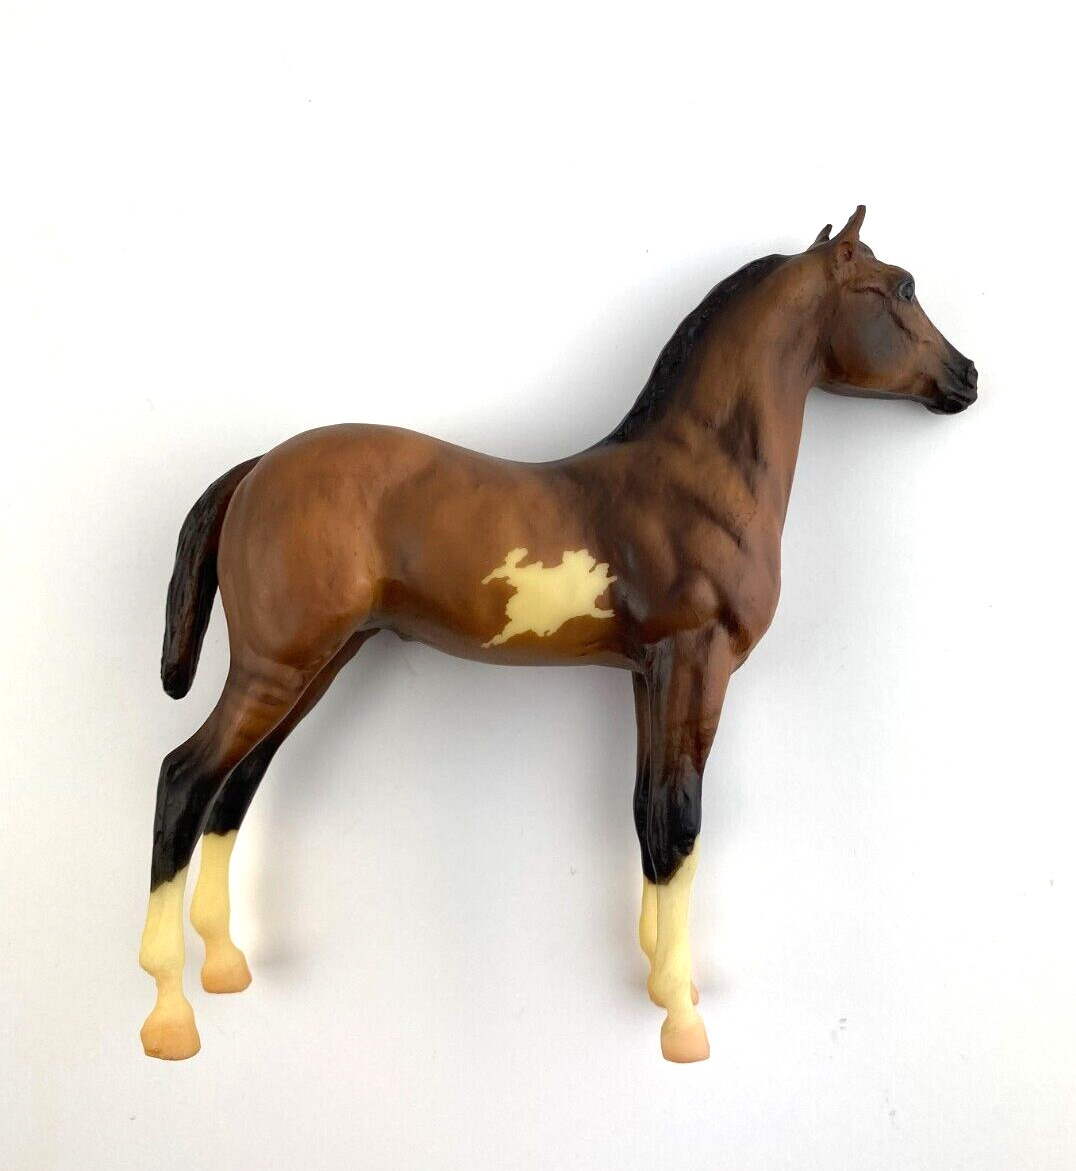 2002 Breyer Paint FOAL Horse Figure no. 1170 - Traditional 7 x 6.75